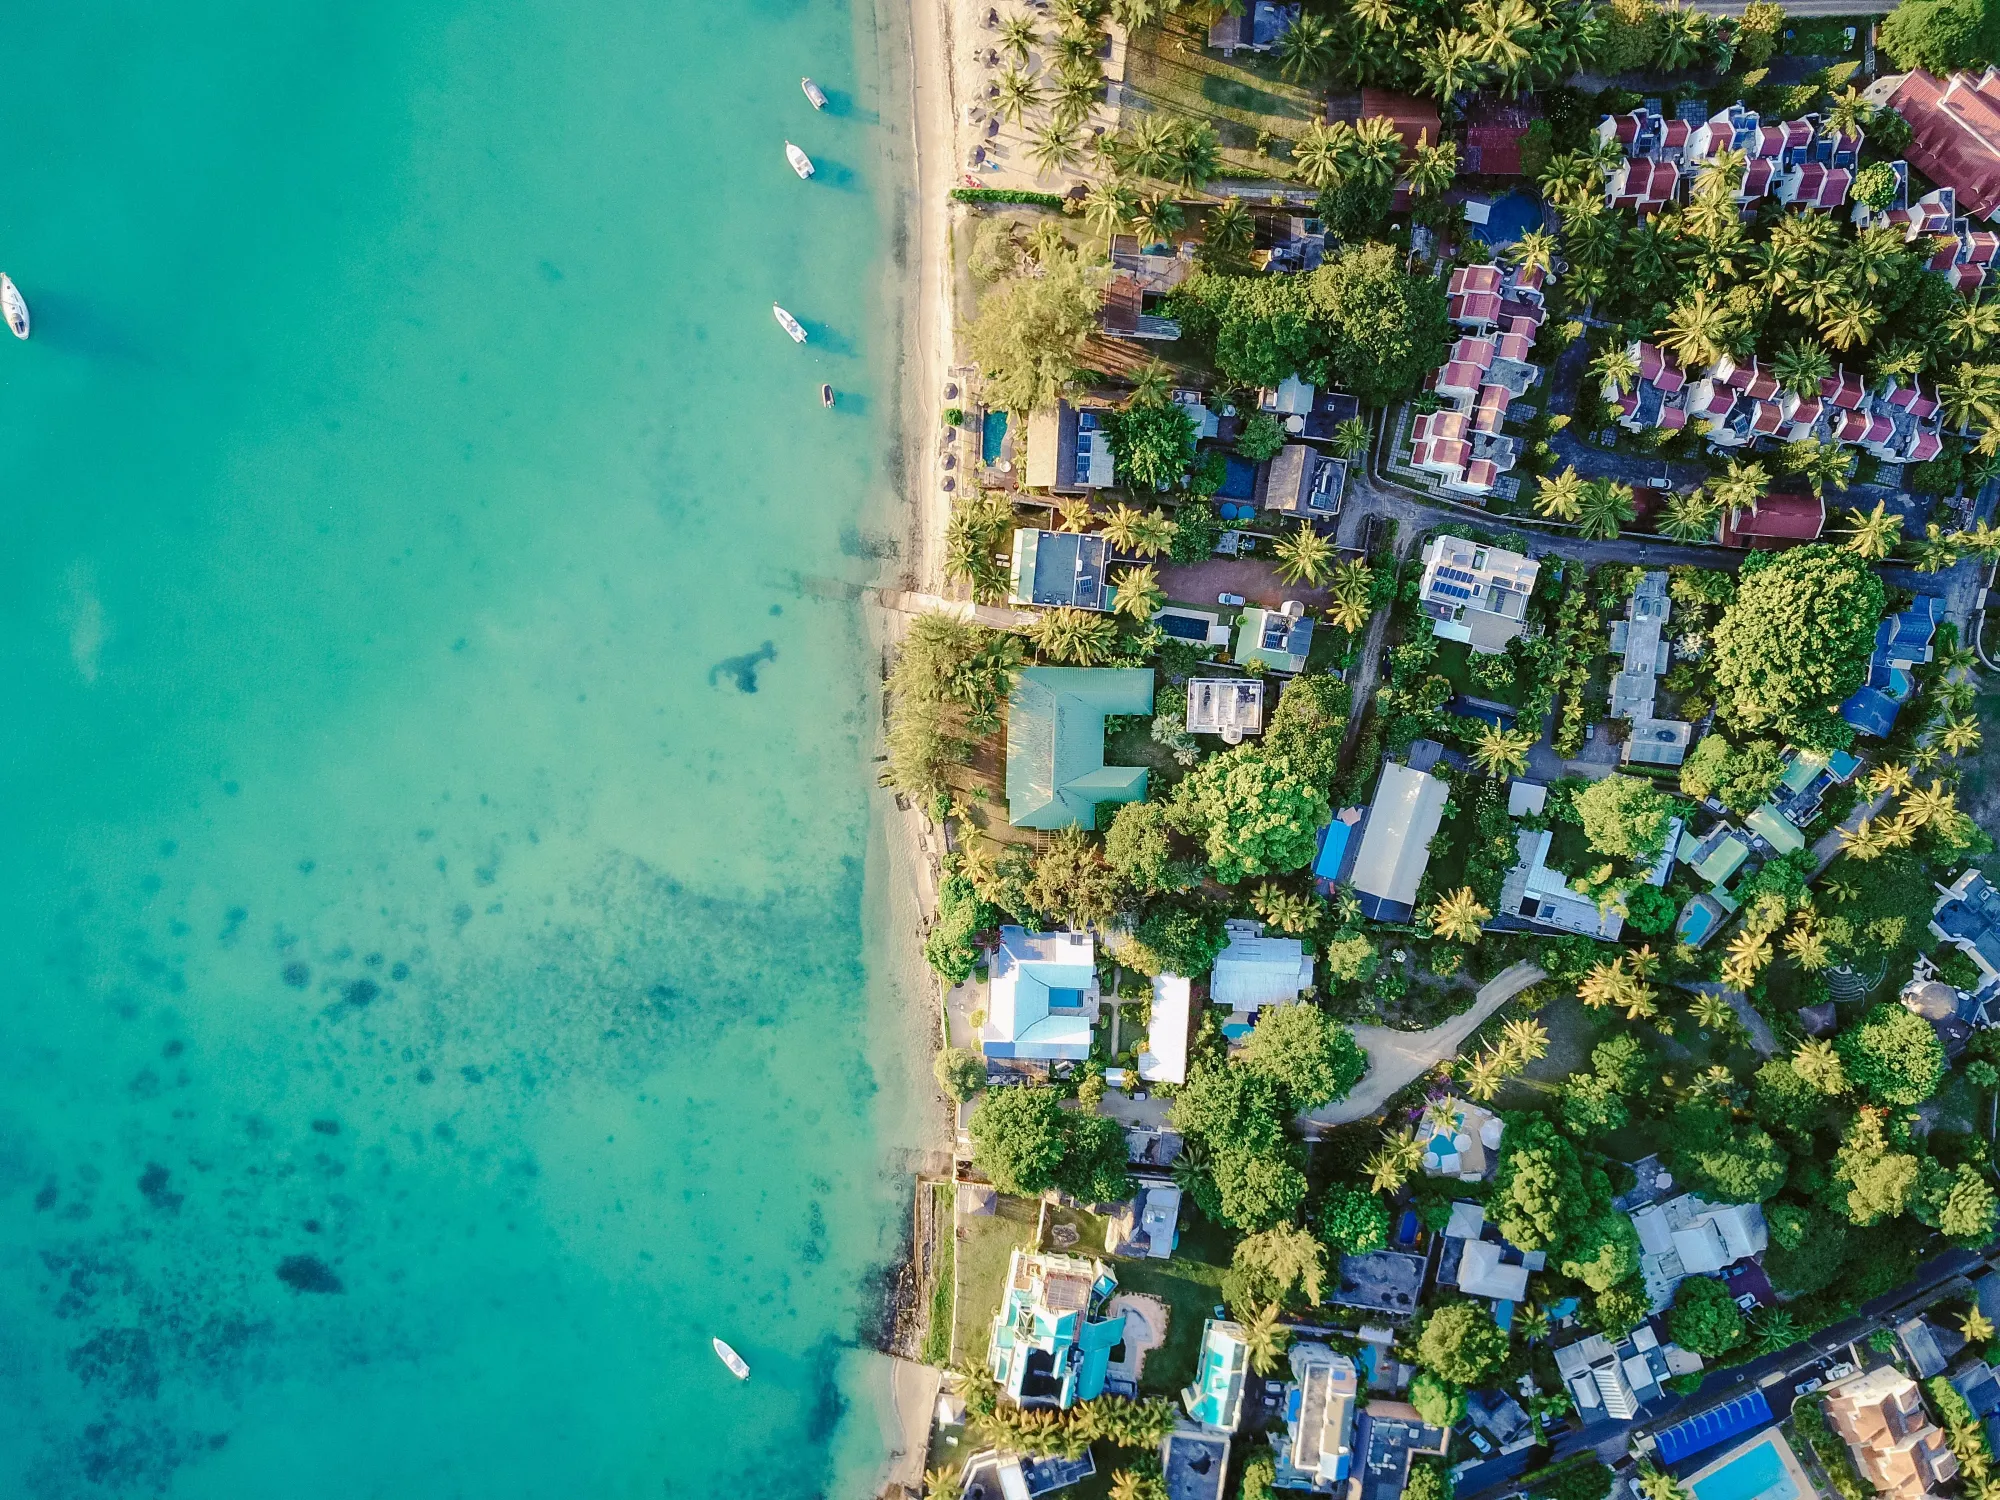 Houses in Mauritius viewed from above